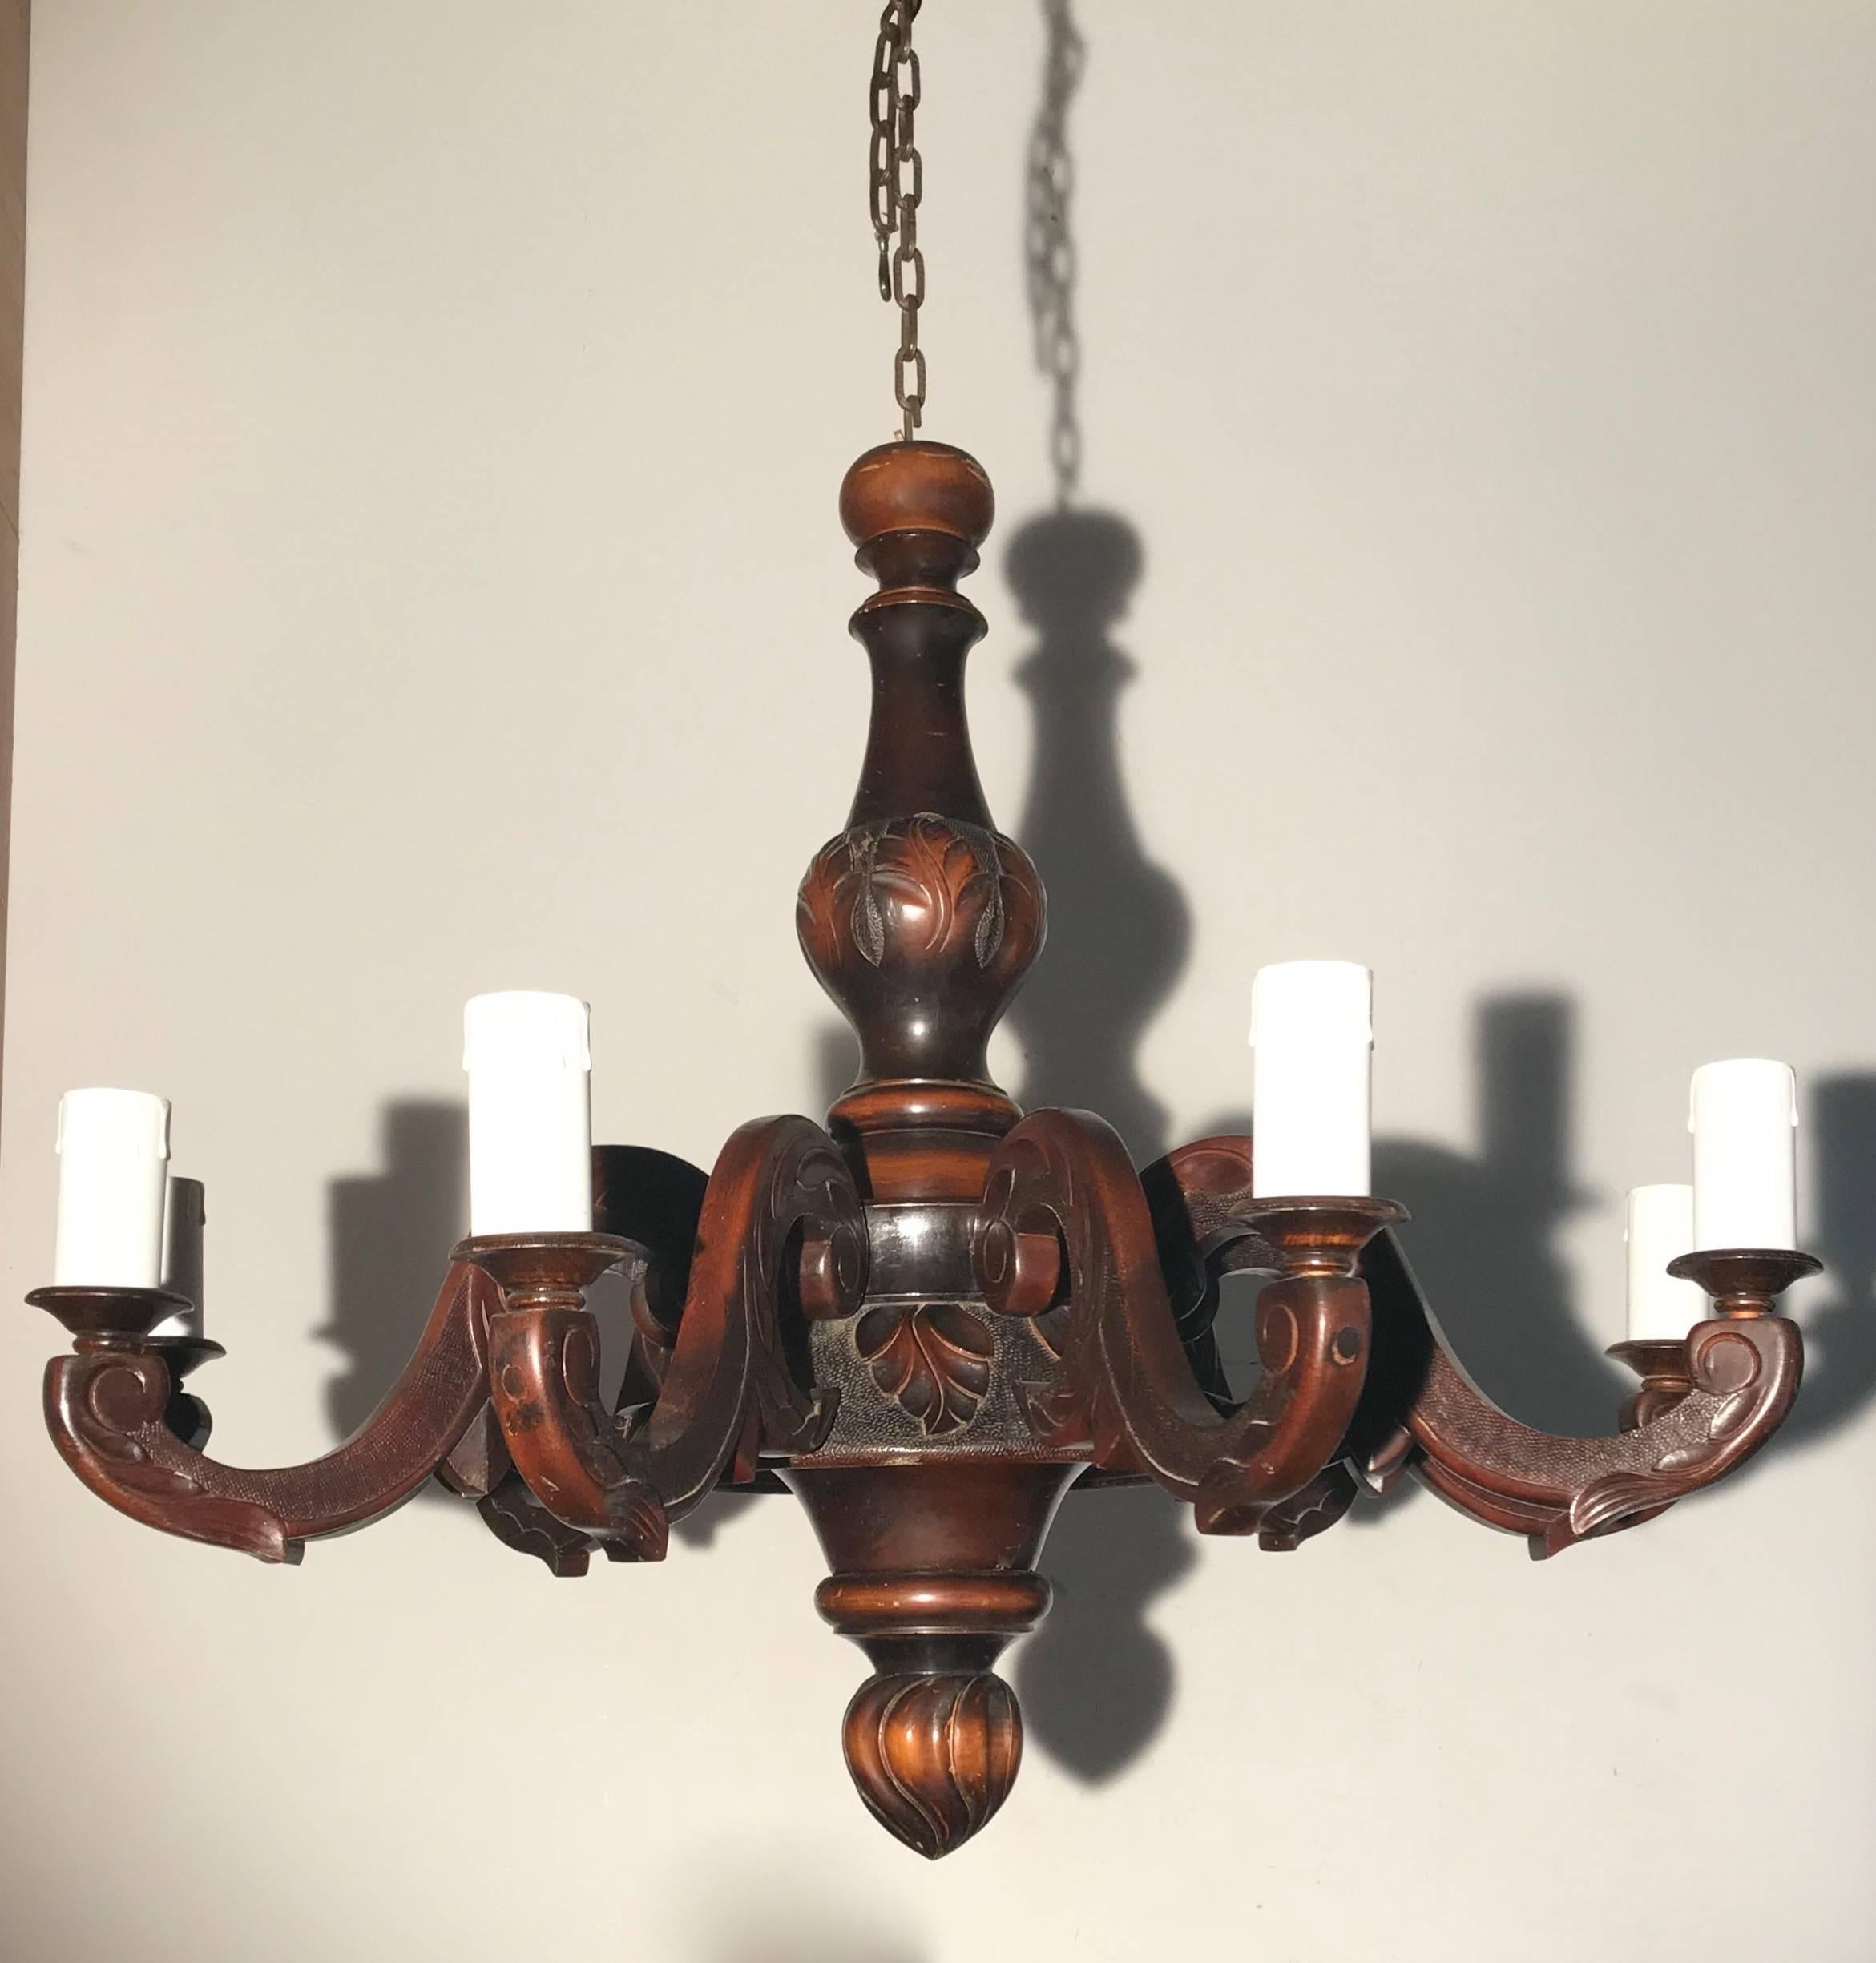 Handsome and well carved nine-light chandelier, from circa 1915.

If you are looking for a sizeable, classical wooden chandelier with a warm look and feel to create just the right atmosphere in your dining room then this could be the one for you.